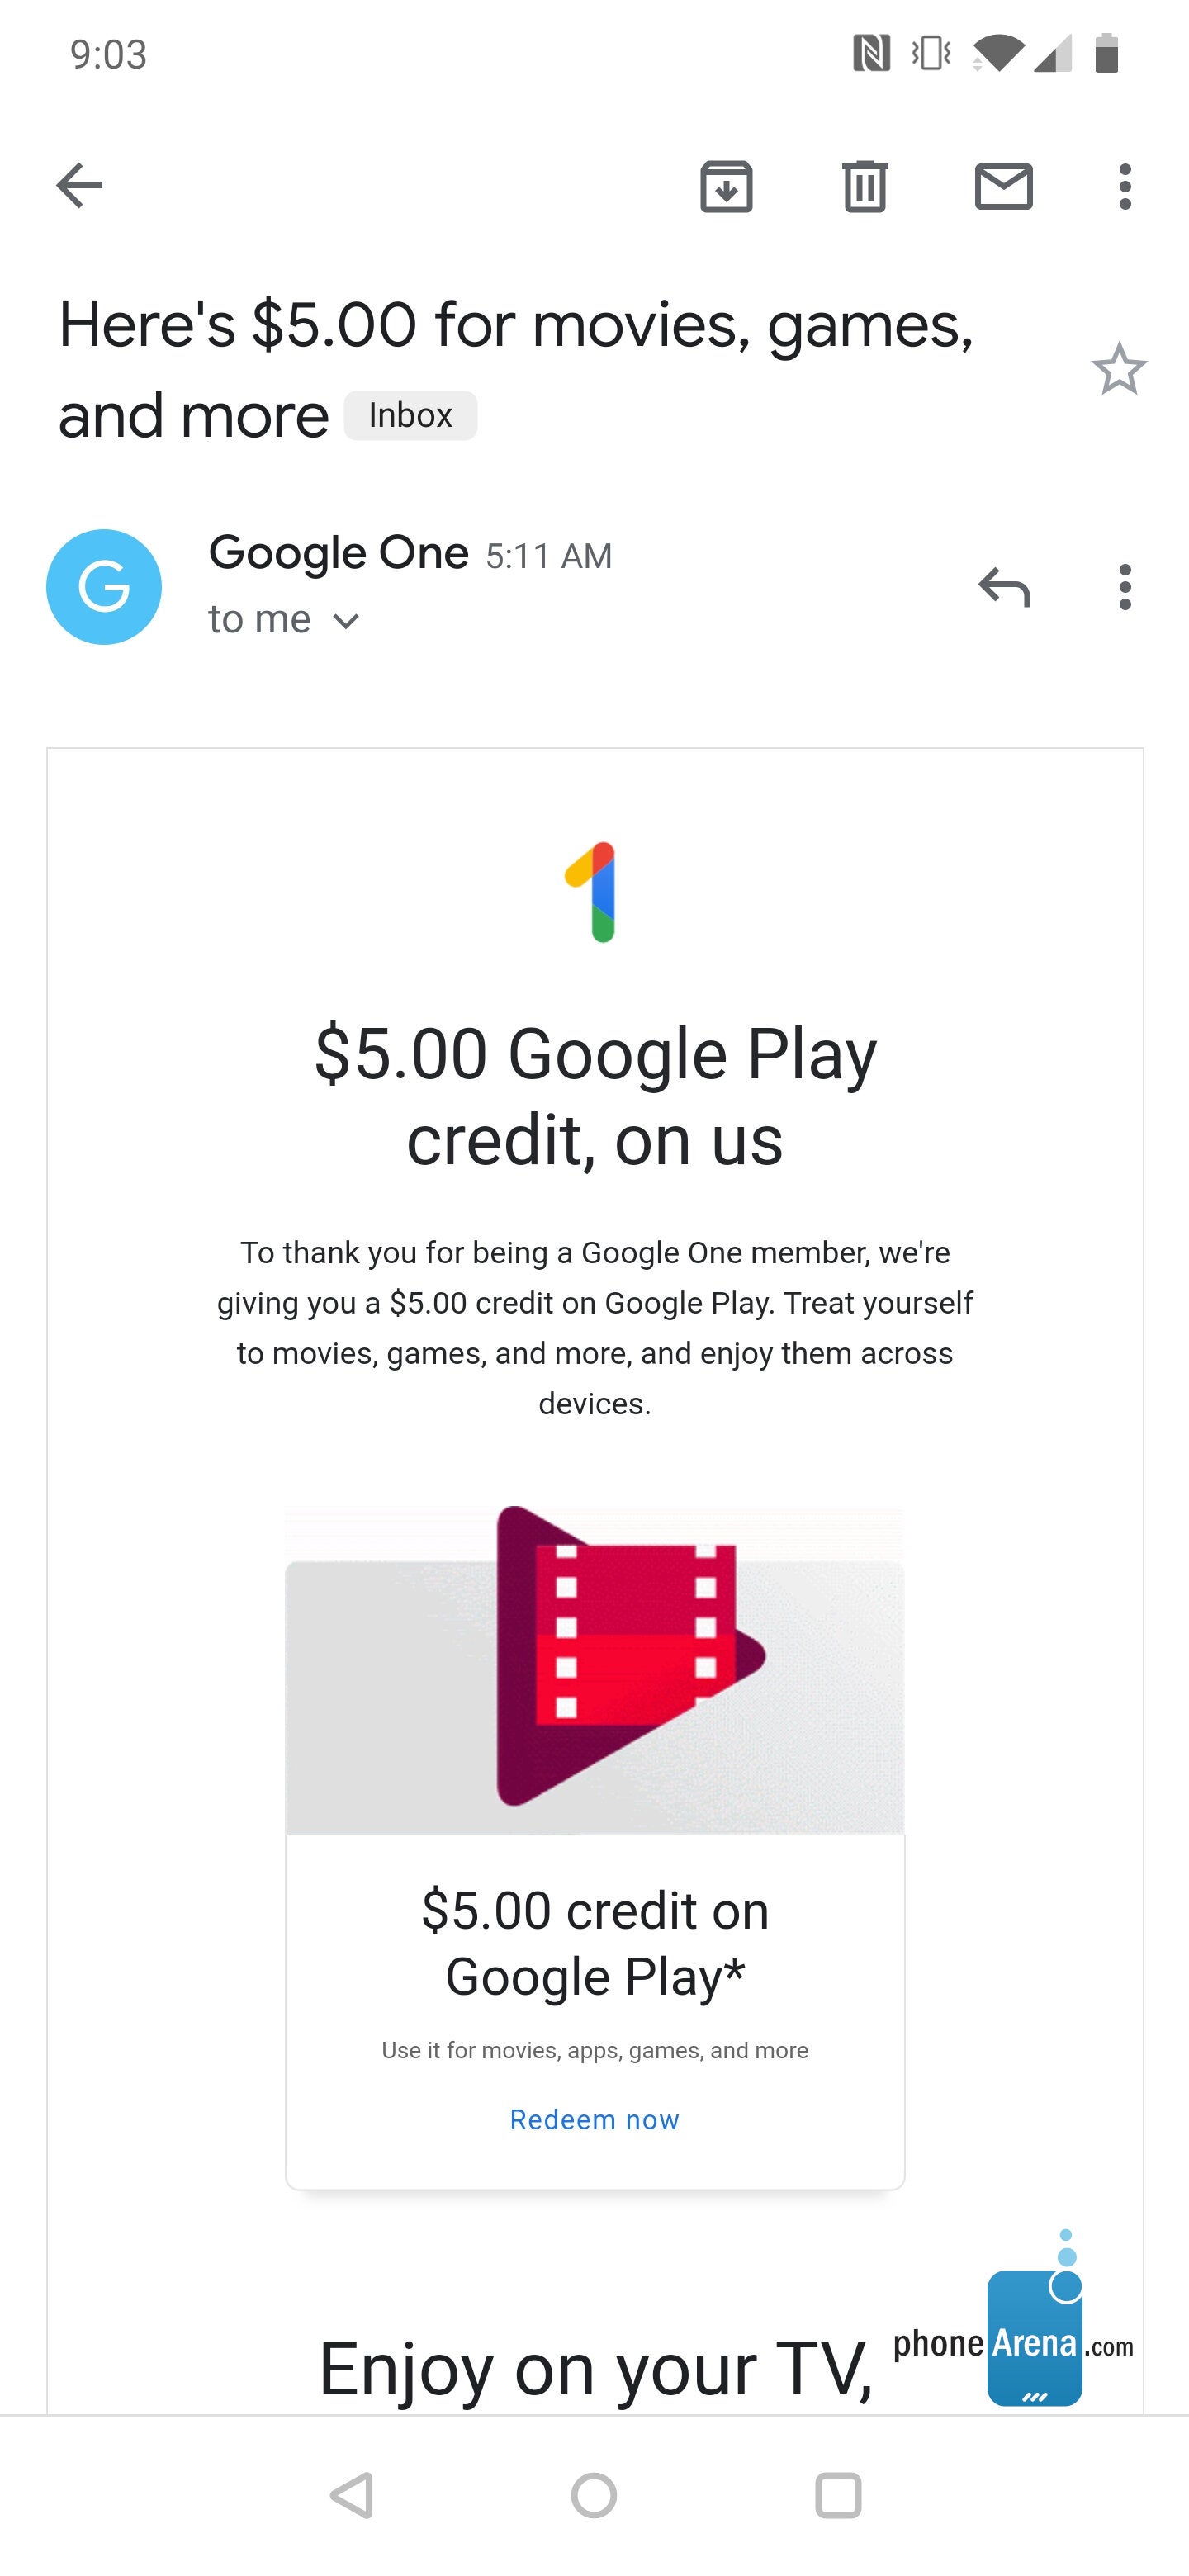 Google One subscribers are in for a nice surprise